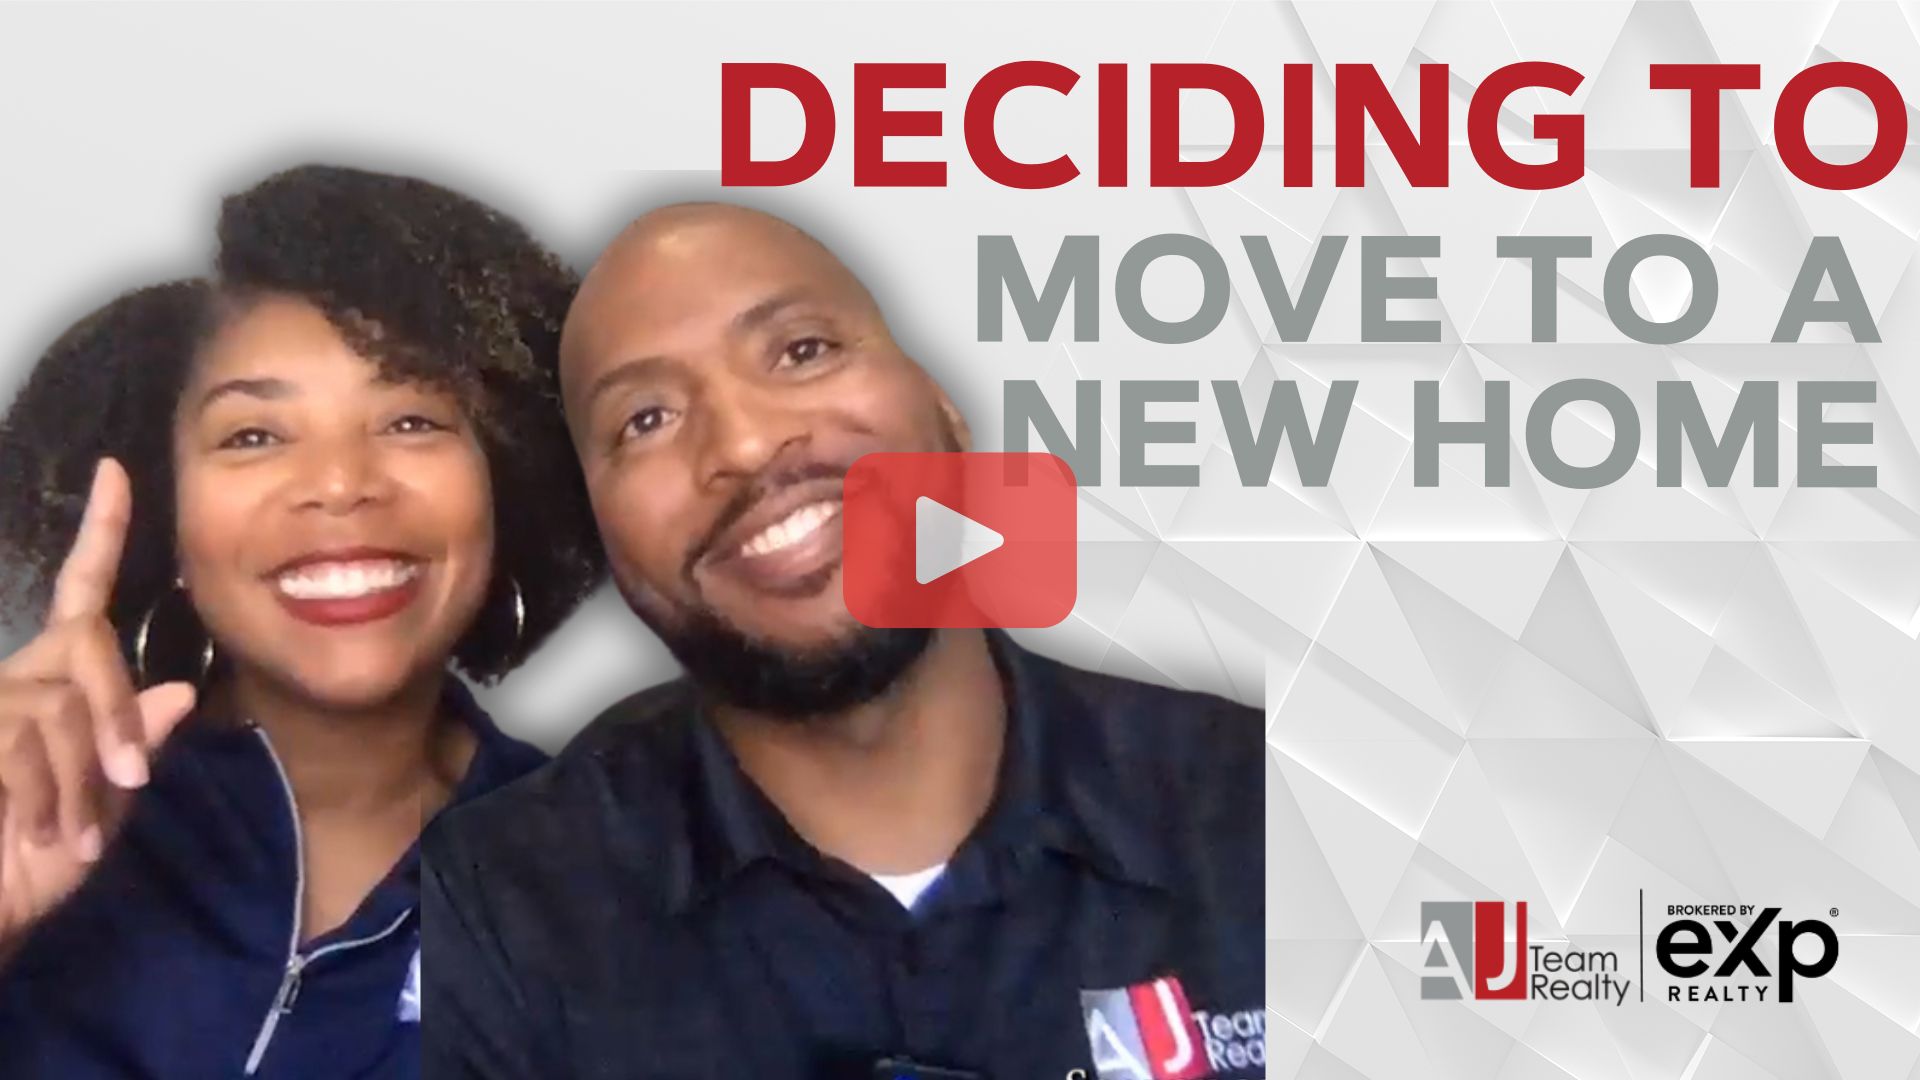 Why We Decided to Give Up our 2.5% Mortgage Rate for a New House